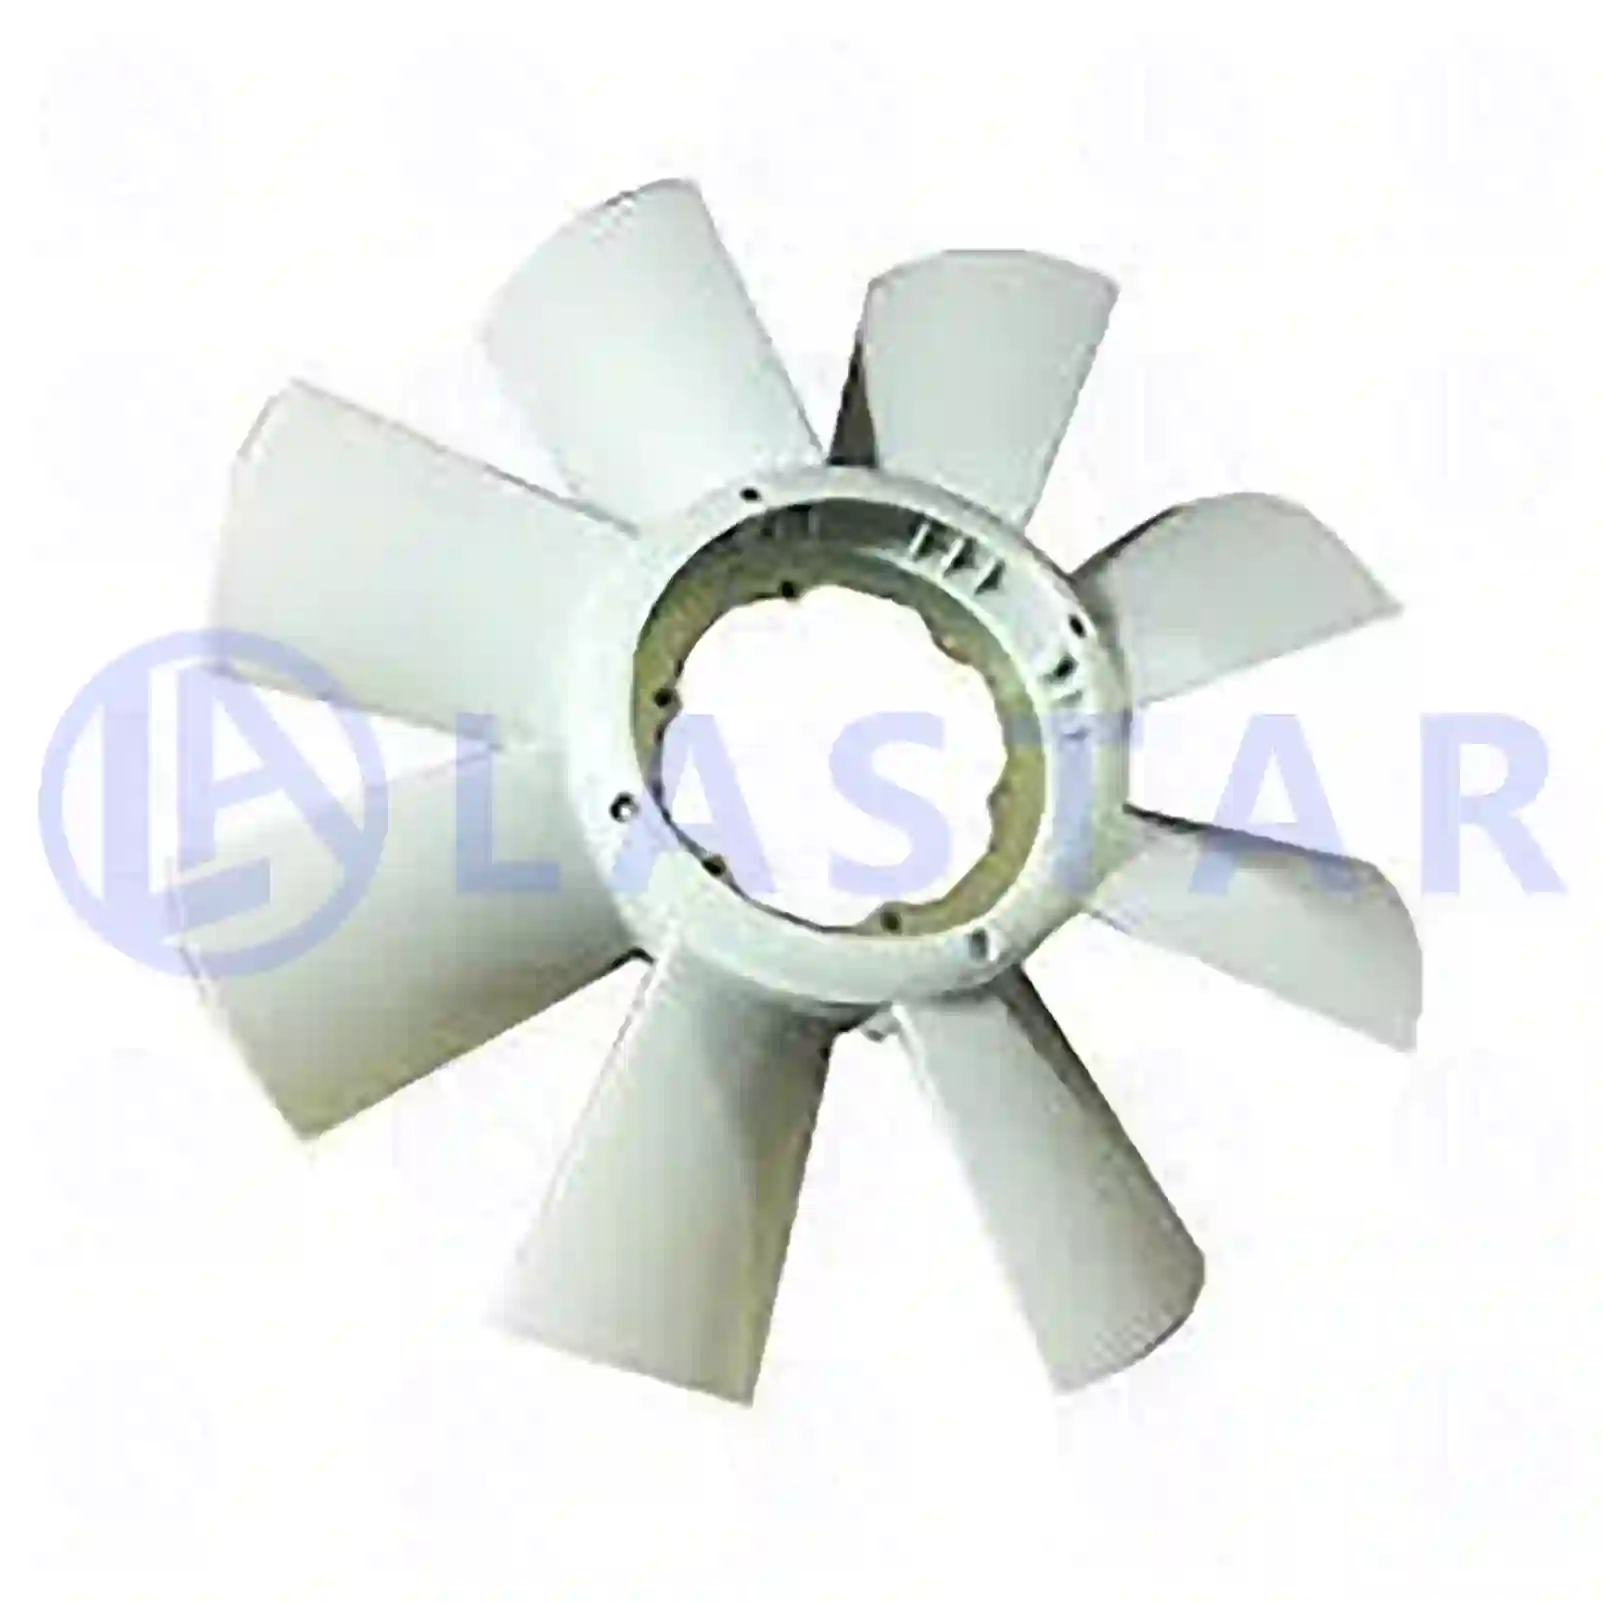 Fan with clutch, 77708814, 10571083, 10571084, 1354980, 1402869, 1411429, 1412398, 1571083, 571083, 571084 ||  77708814 Lastar Spare Part | Truck Spare Parts, Auotomotive Spare Parts Fan with clutch, 77708814, 10571083, 10571084, 1354980, 1402869, 1411429, 1412398, 1571083, 571083, 571084 ||  77708814 Lastar Spare Part | Truck Spare Parts, Auotomotive Spare Parts